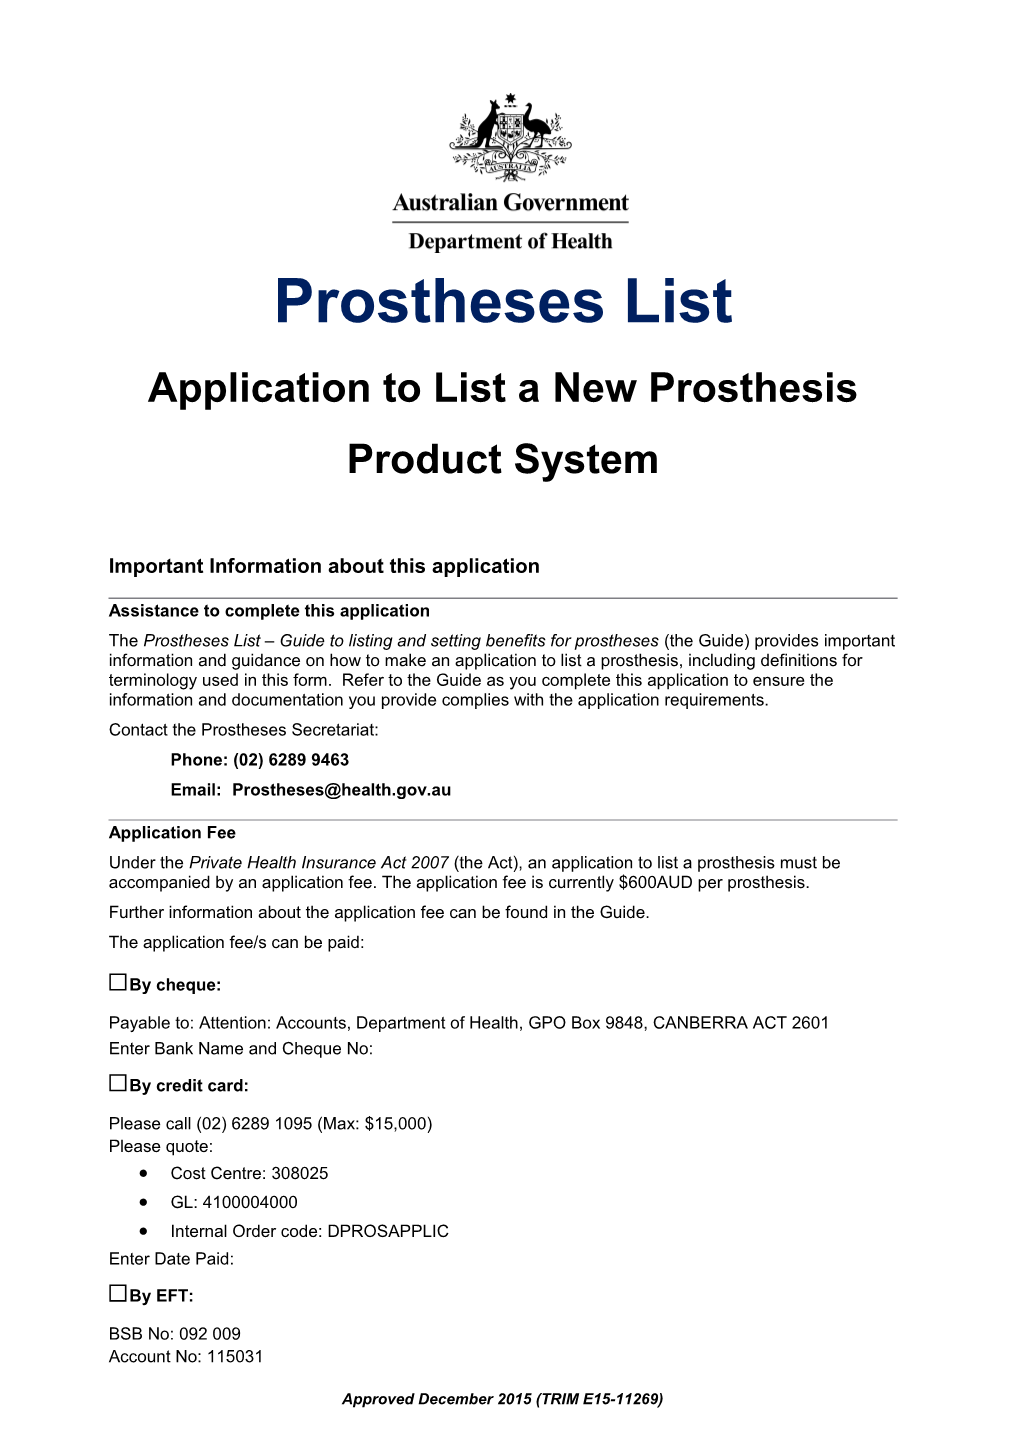 Application to List a New Prosthesis